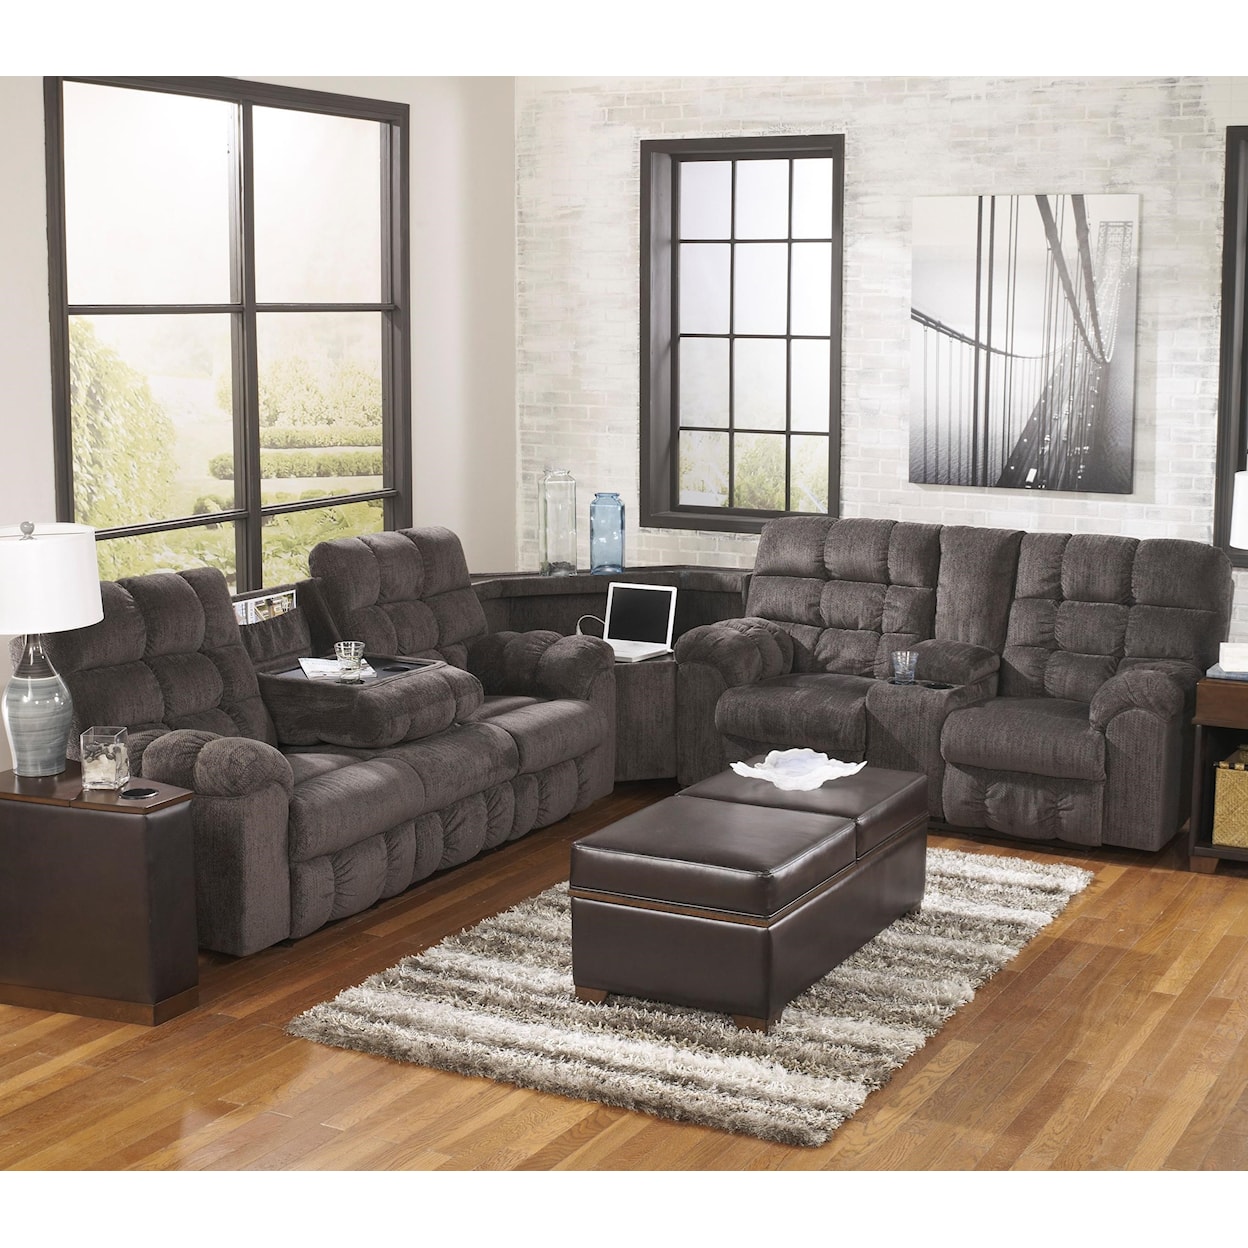 Ashley Furniture Signature Design Acieona Reclining Sectional with Right Side Loveseat